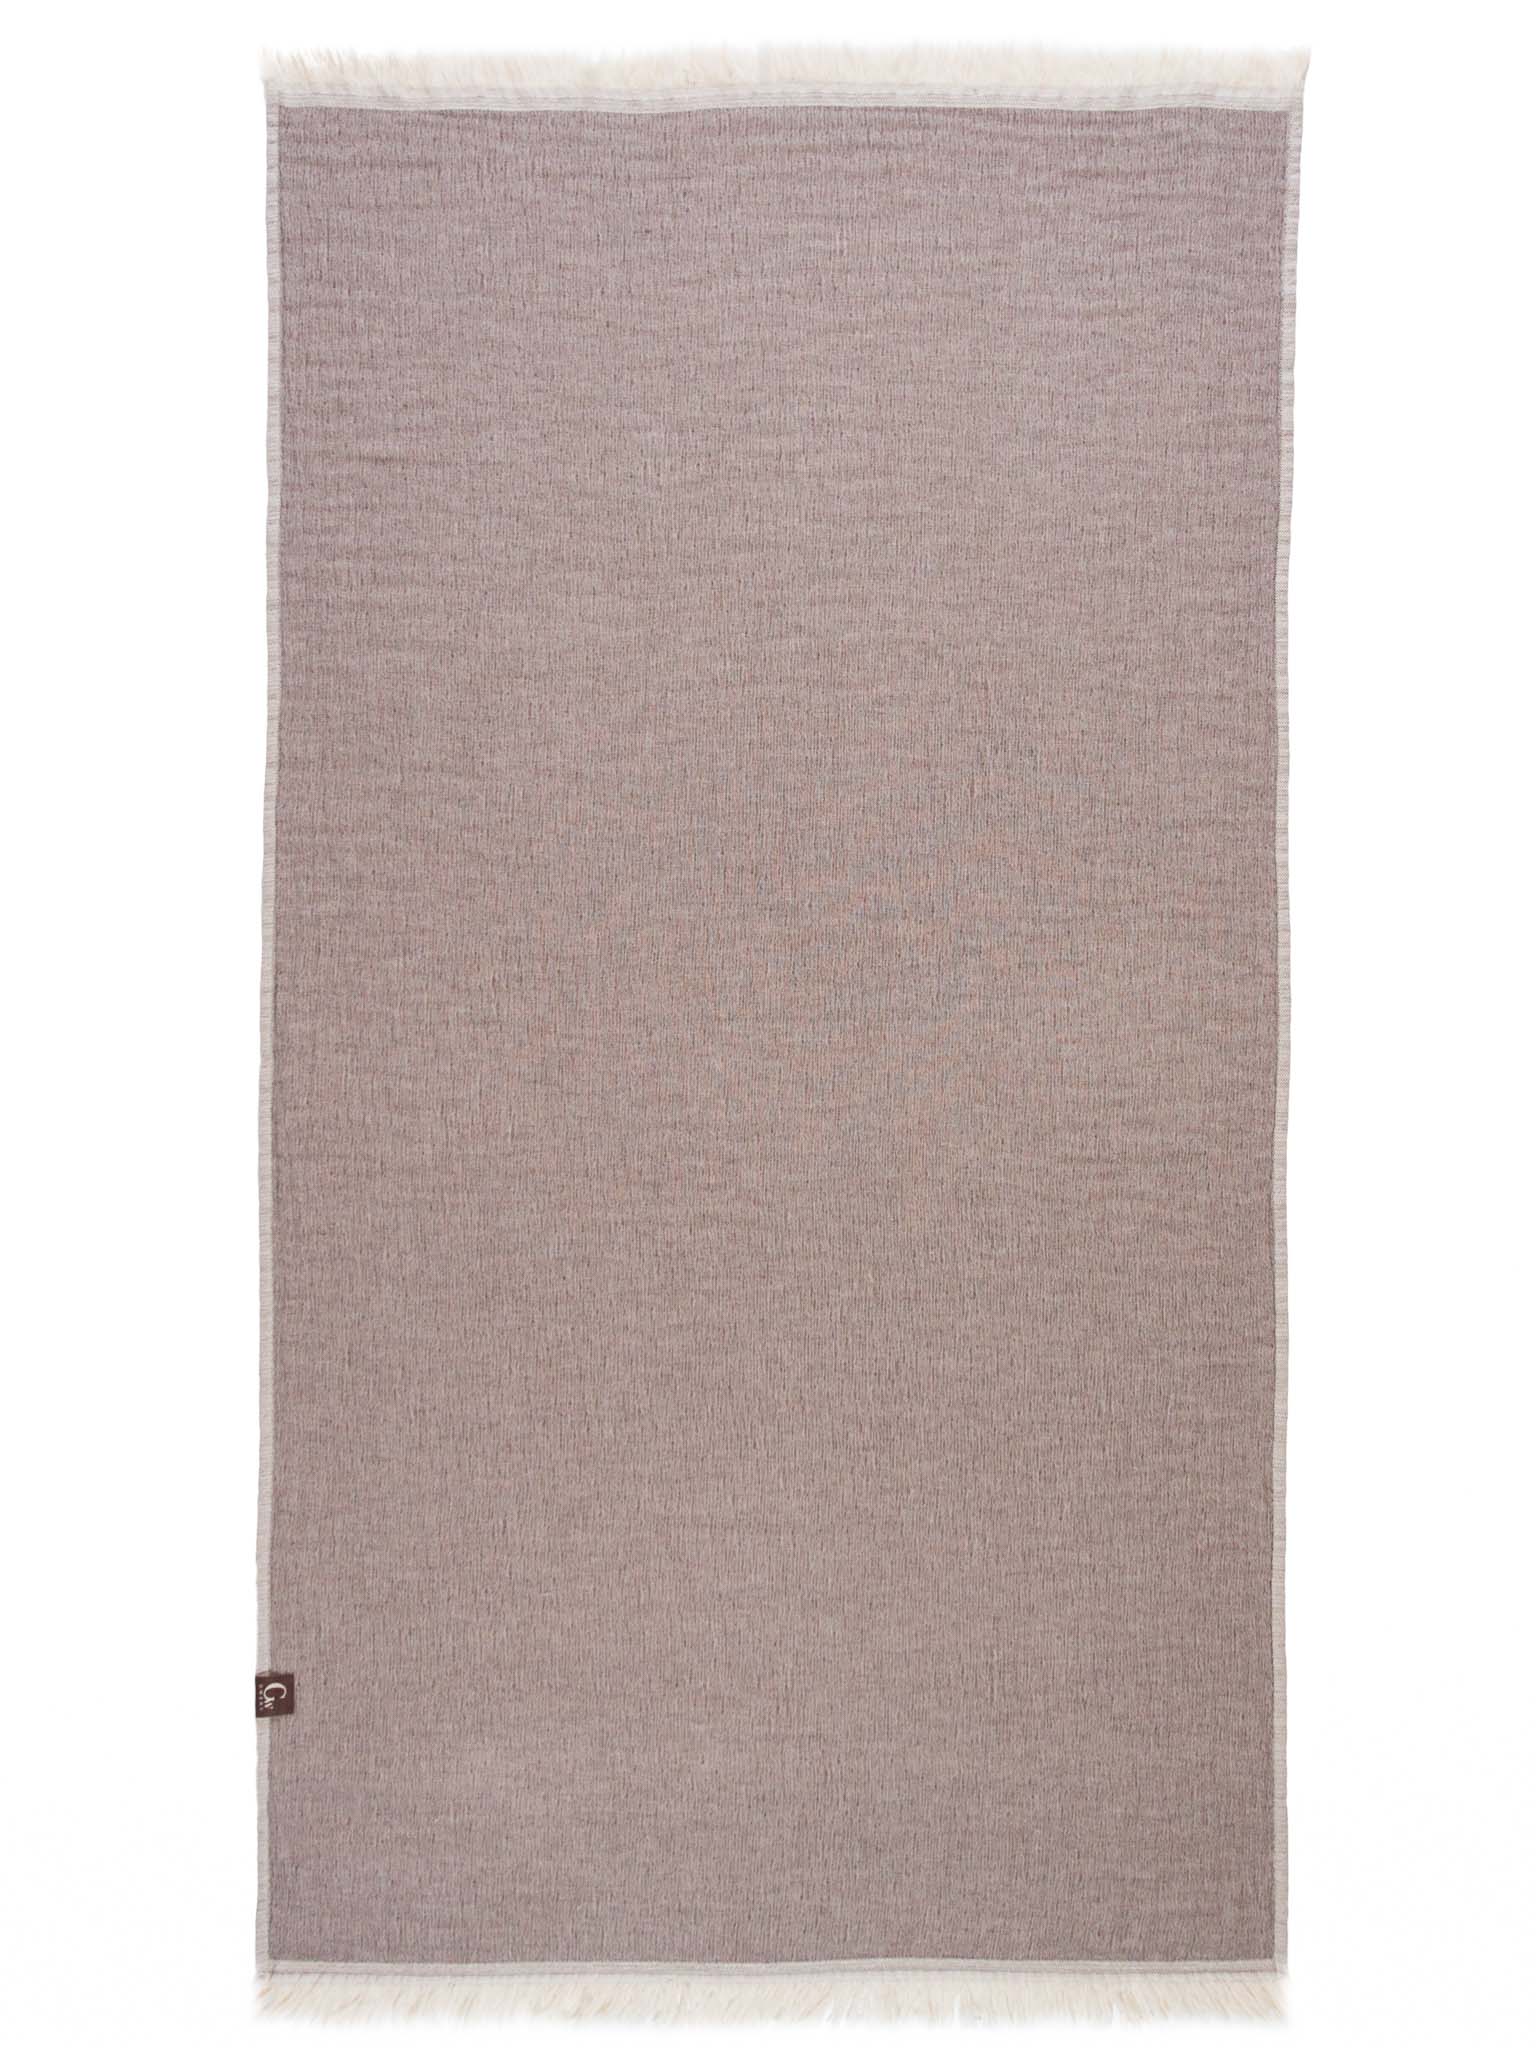 Brown patterned, double sided, beach towel open up